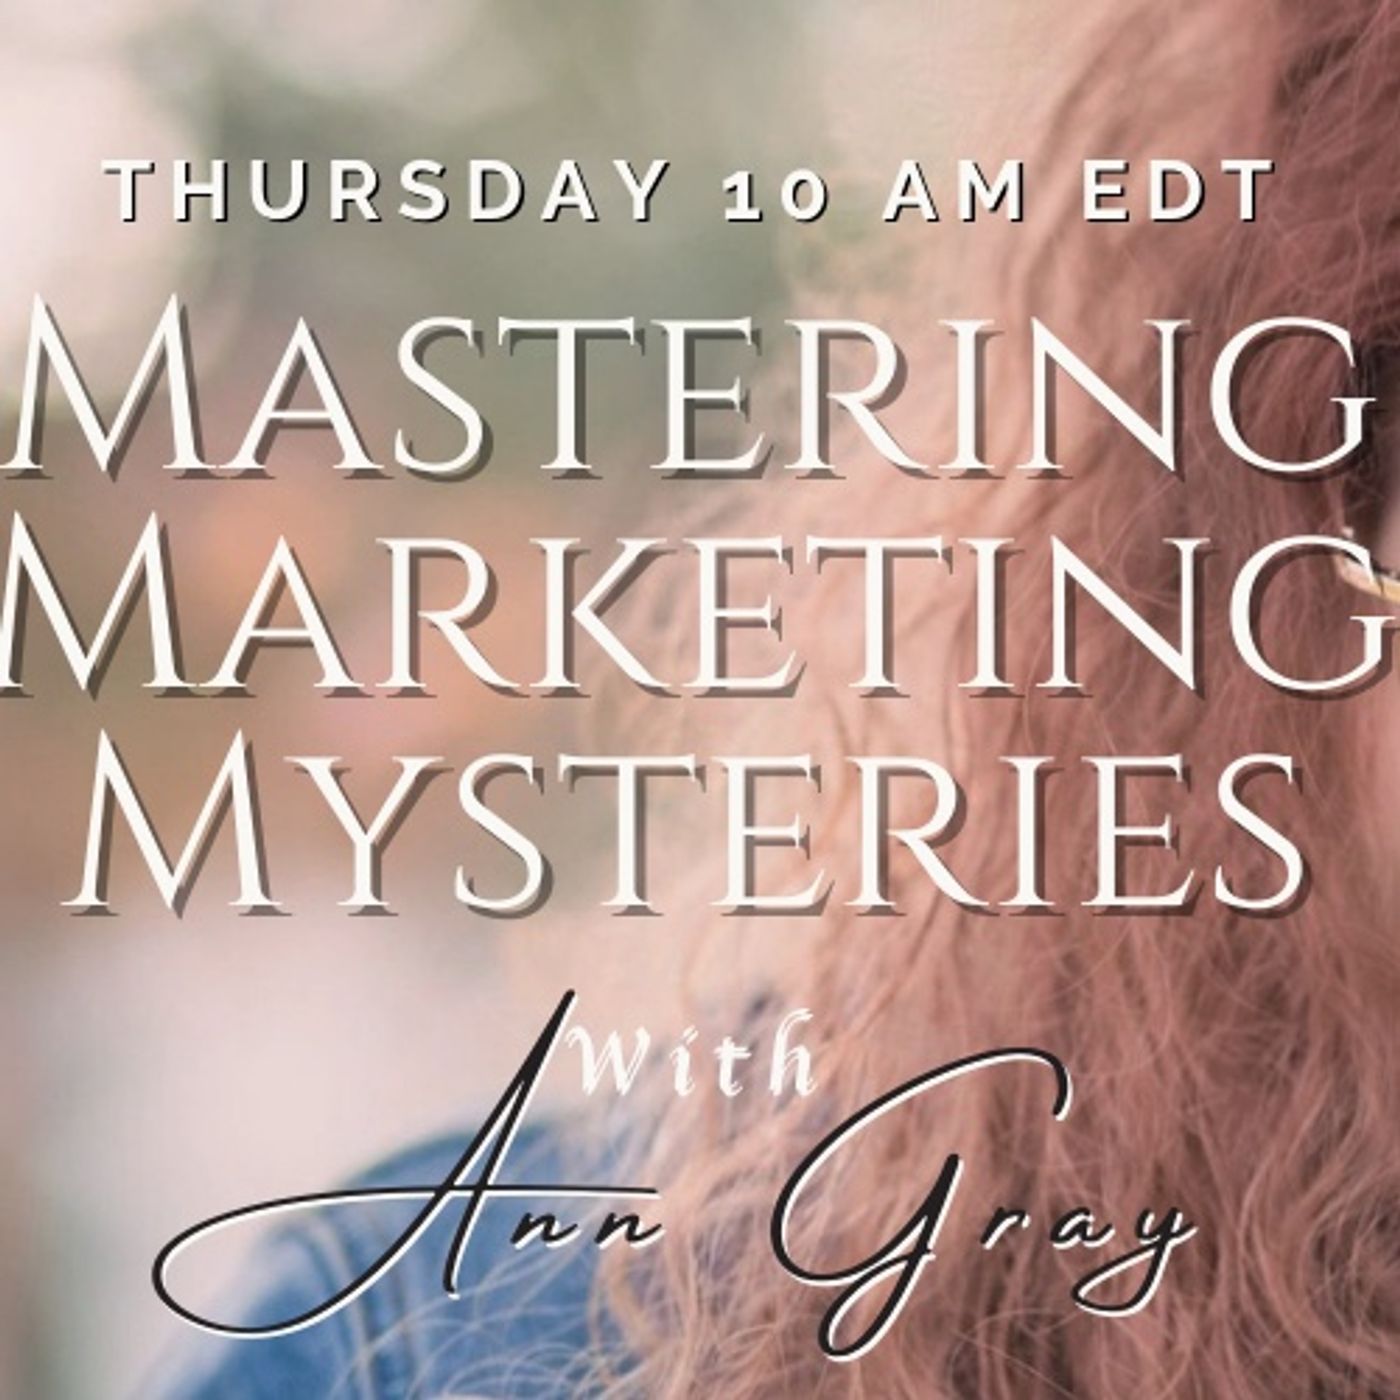 Mastering Marketing Mysteries, With Ann Gray The "Queen of Social Media Marketing."